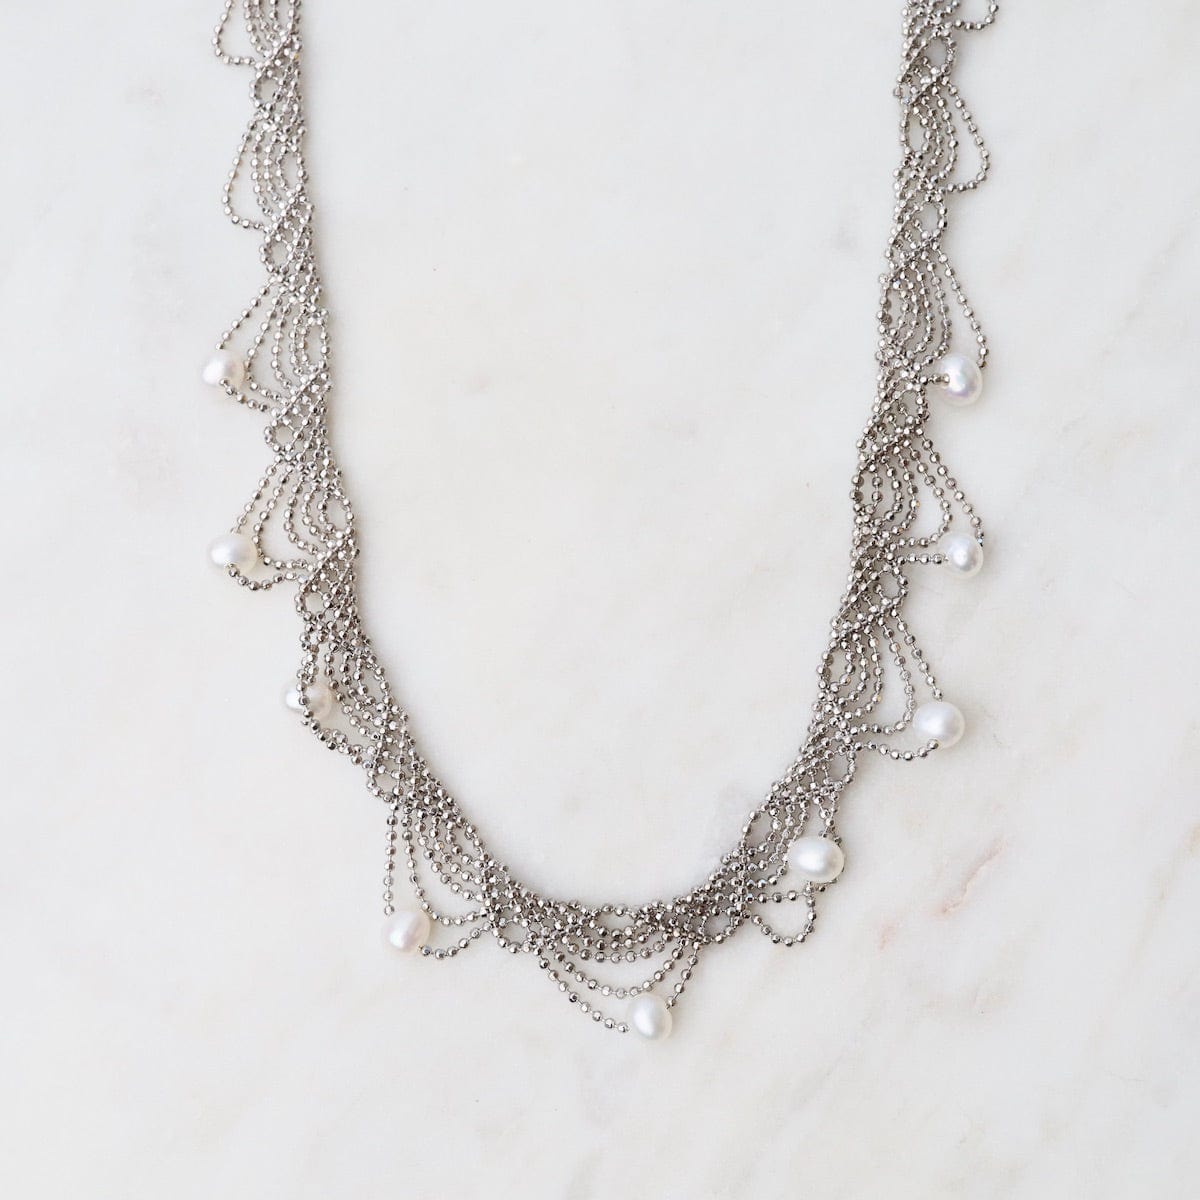 NKL Small Lace Drape with White Pearls Necklace